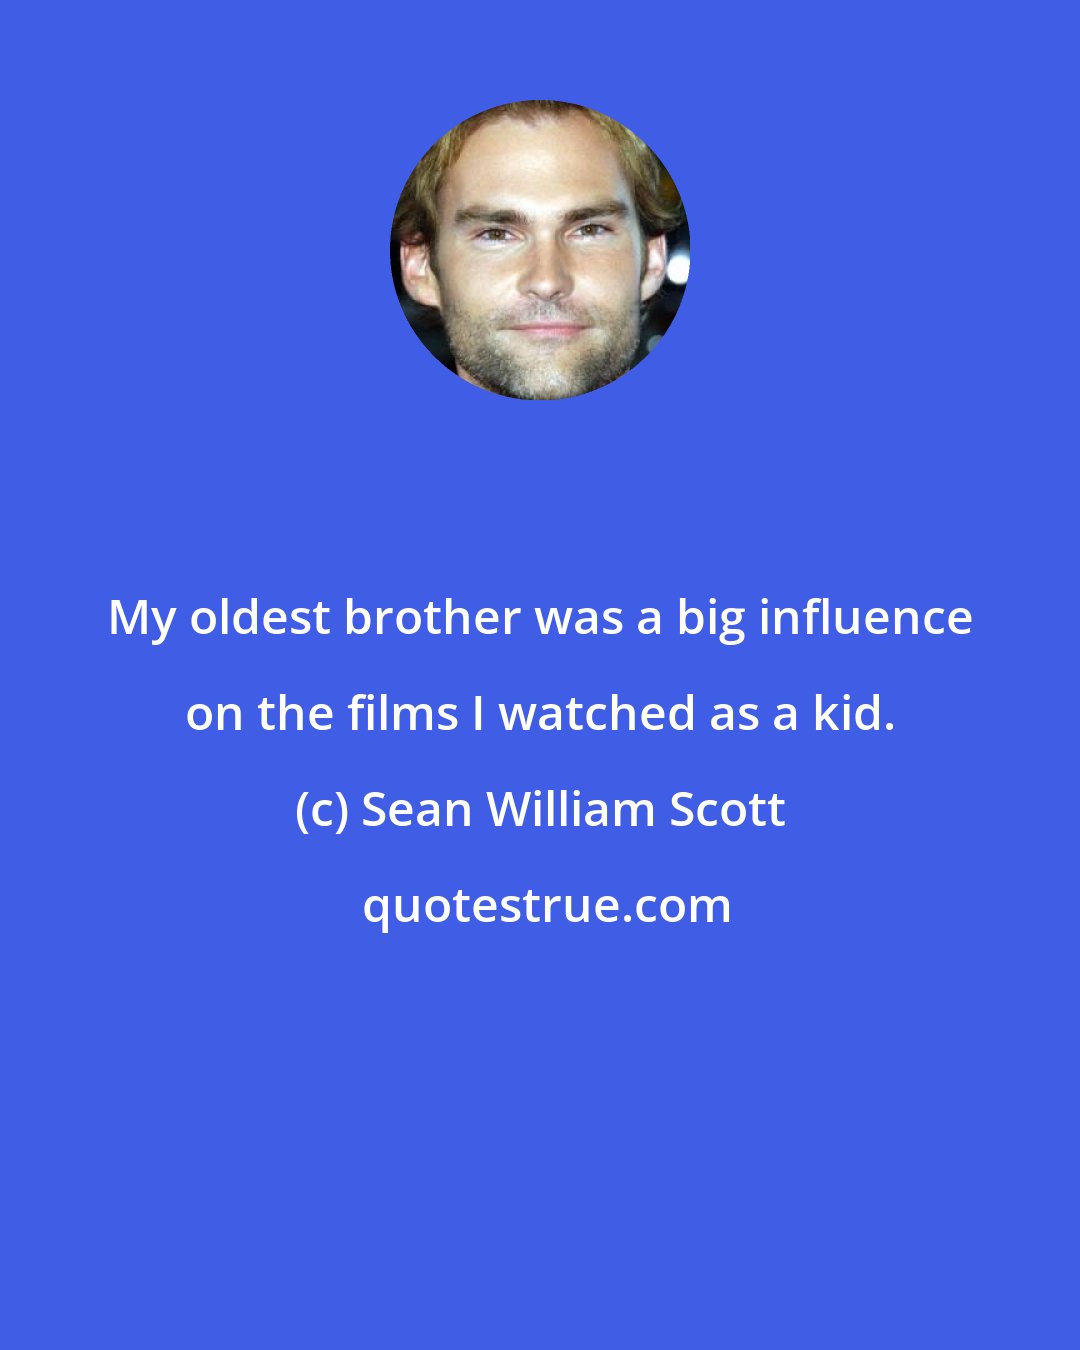 Sean William Scott: My oldest brother was a big influence on the films I watched as a kid.